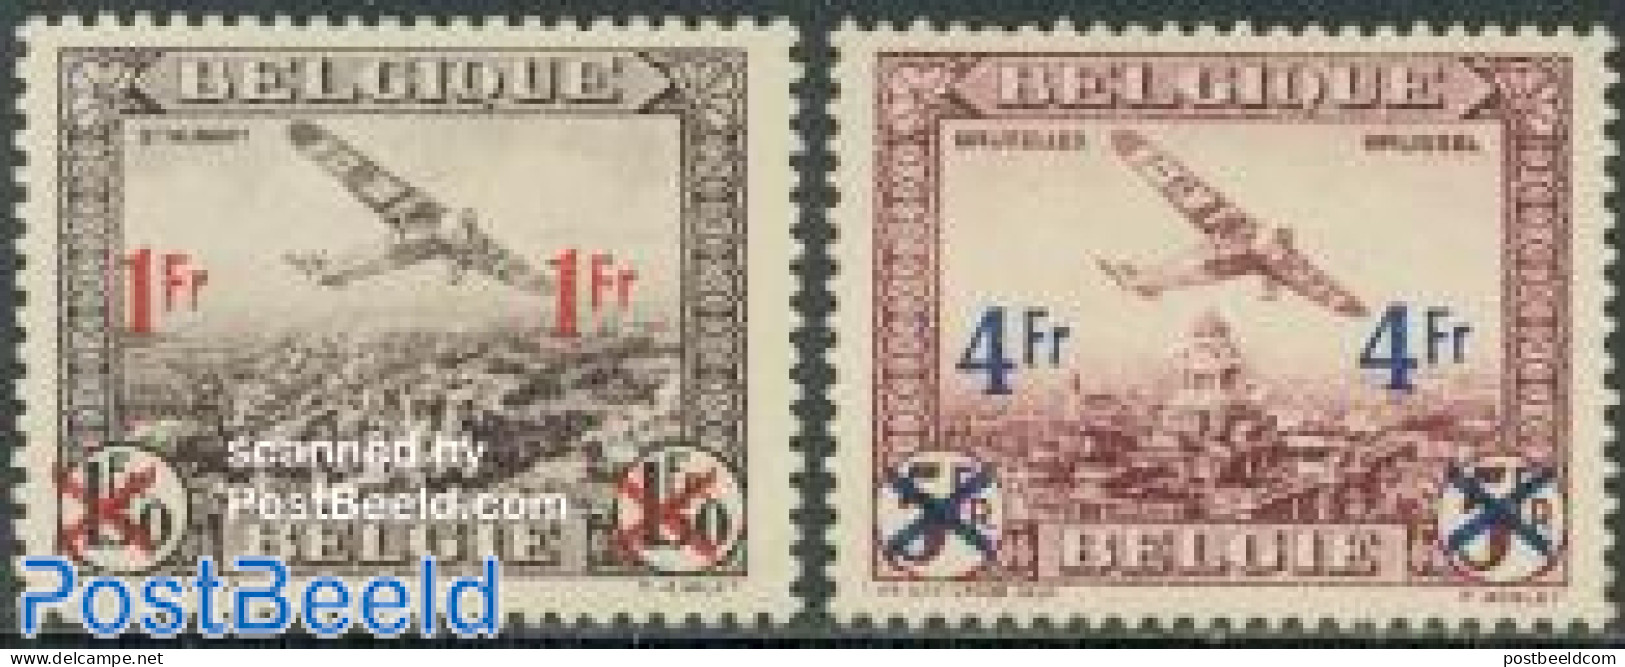 Belgium 1935 Airmail Overprints 2v, Mint NH, Transport - Aircraft & Aviation - Unused Stamps